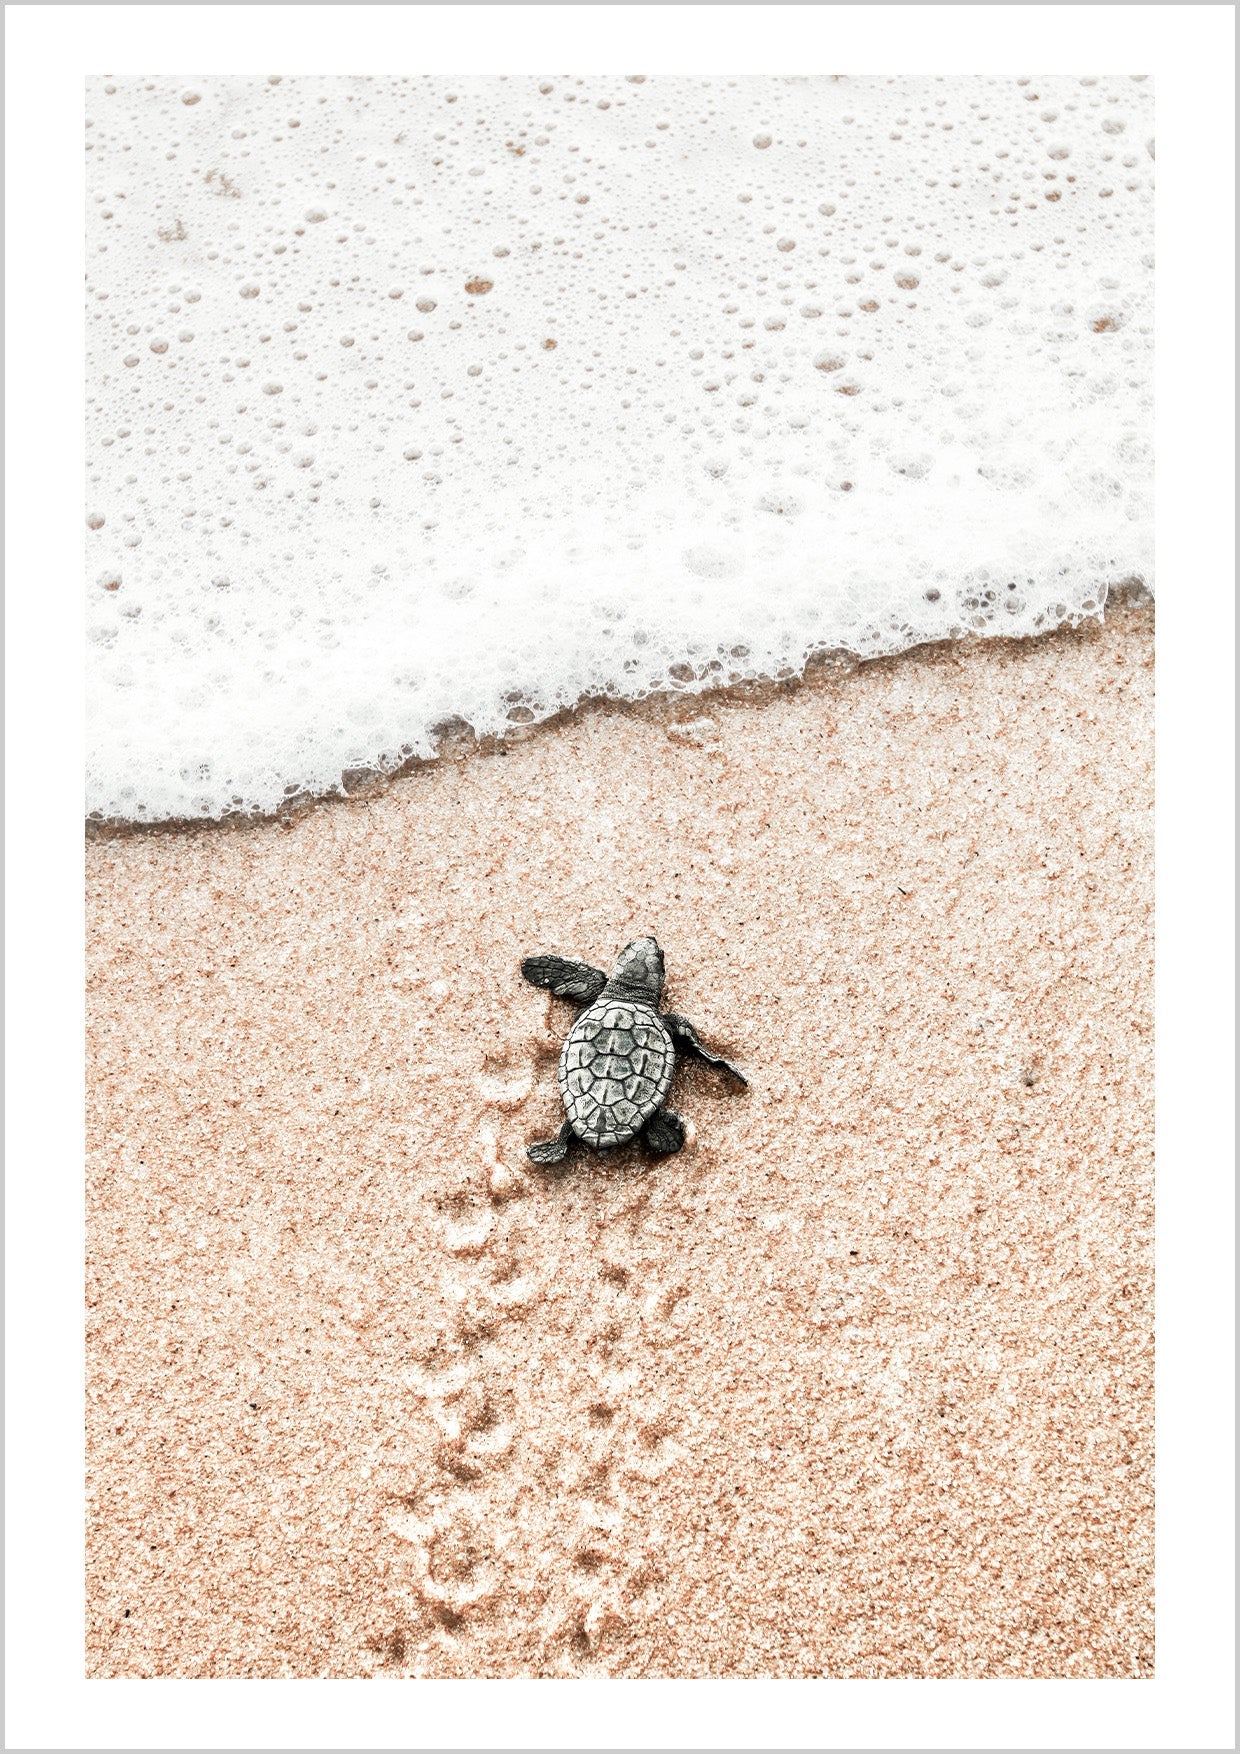 Photography of a baby sea turtle crawling on sand going towards the ocean